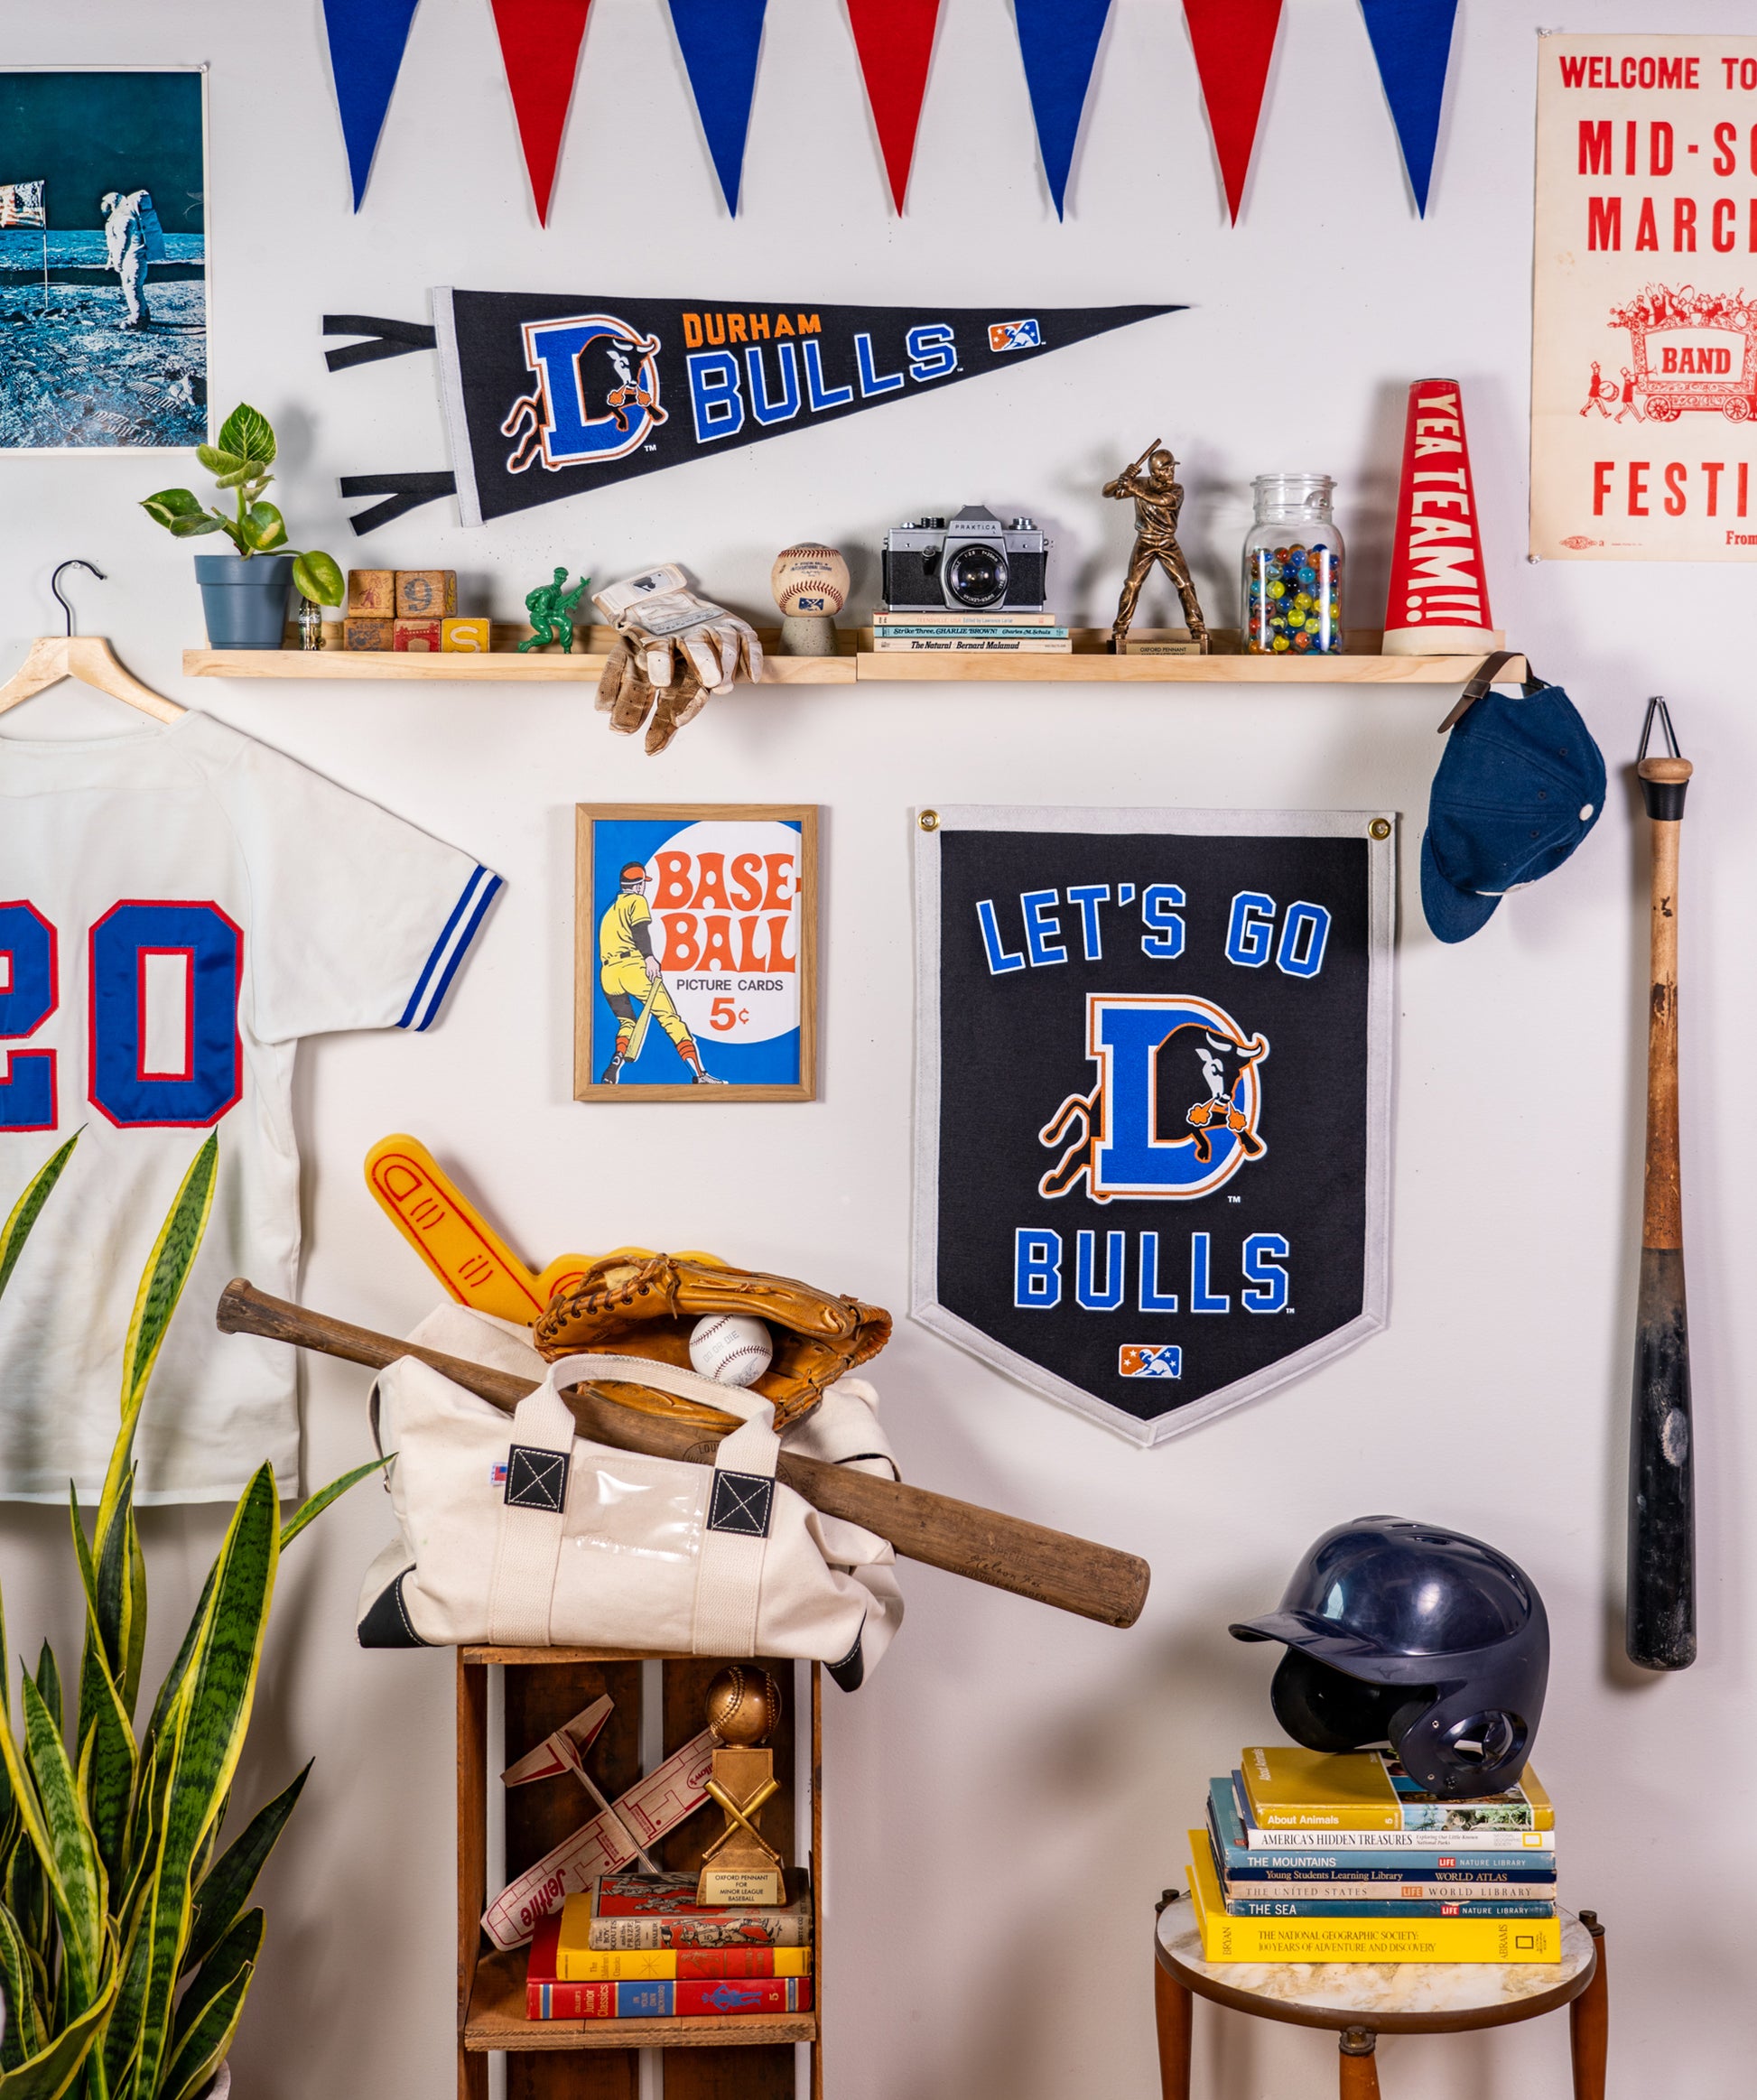 Durham Bulls on X: It's National Retro Day, which is a great